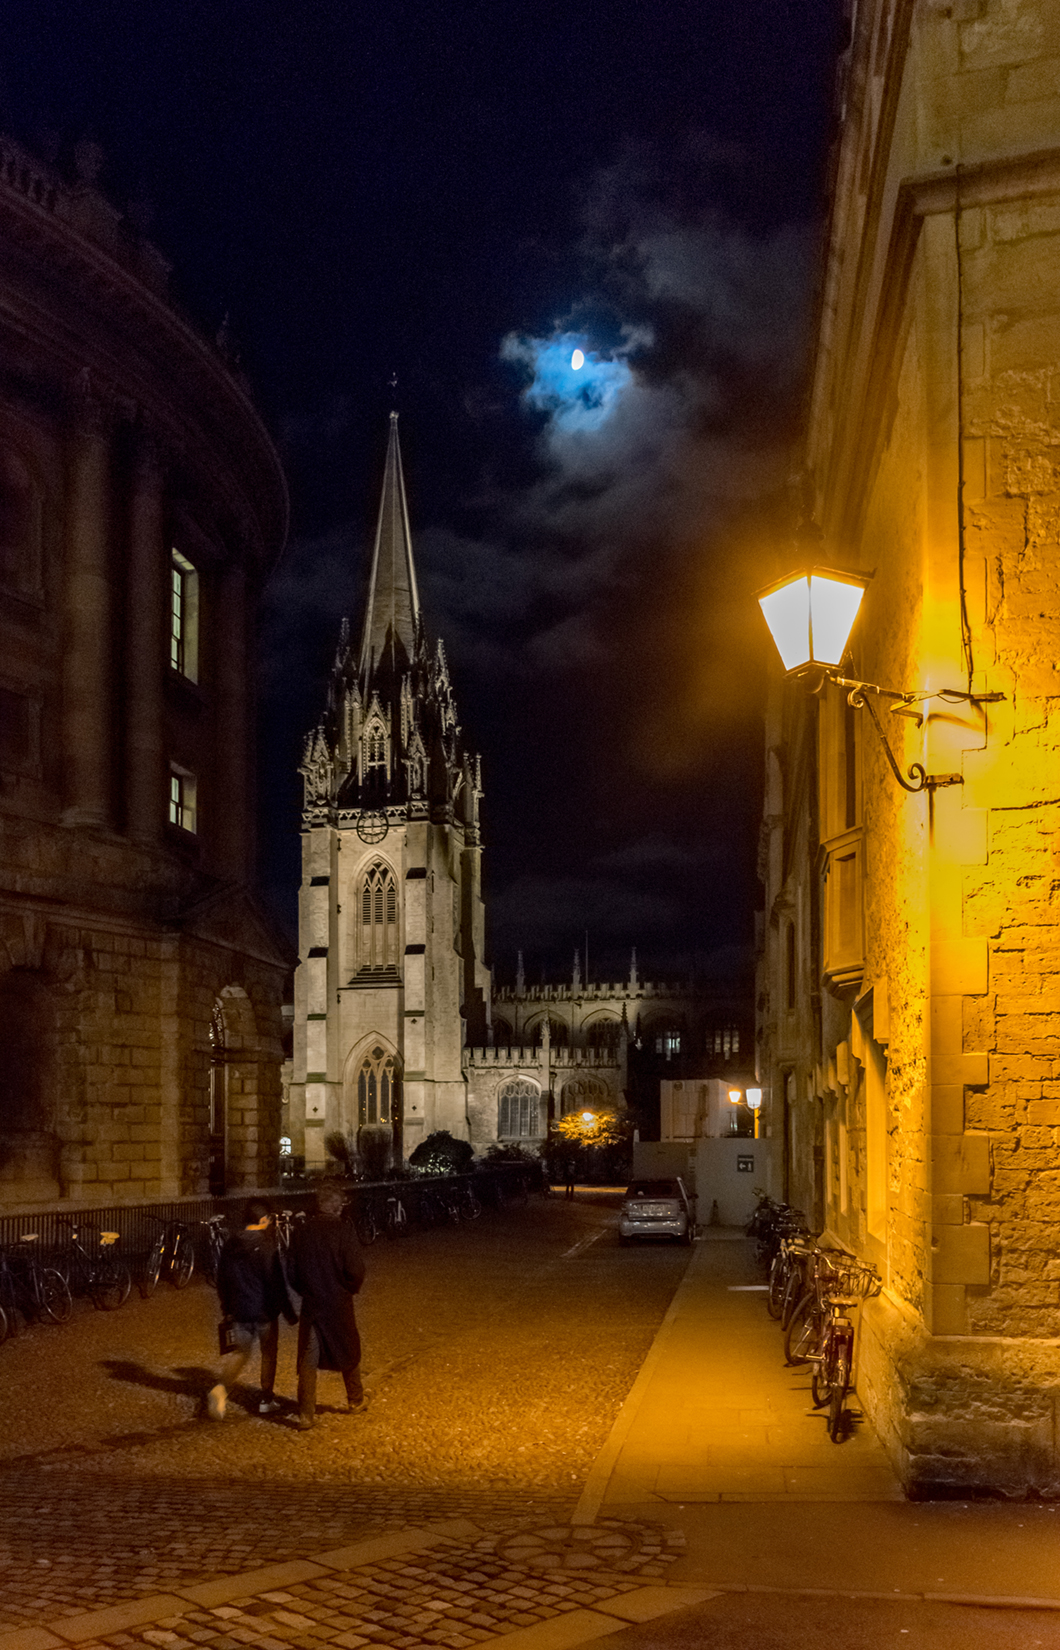 Radcliffe Square and the University Church of St Mary the Virgin